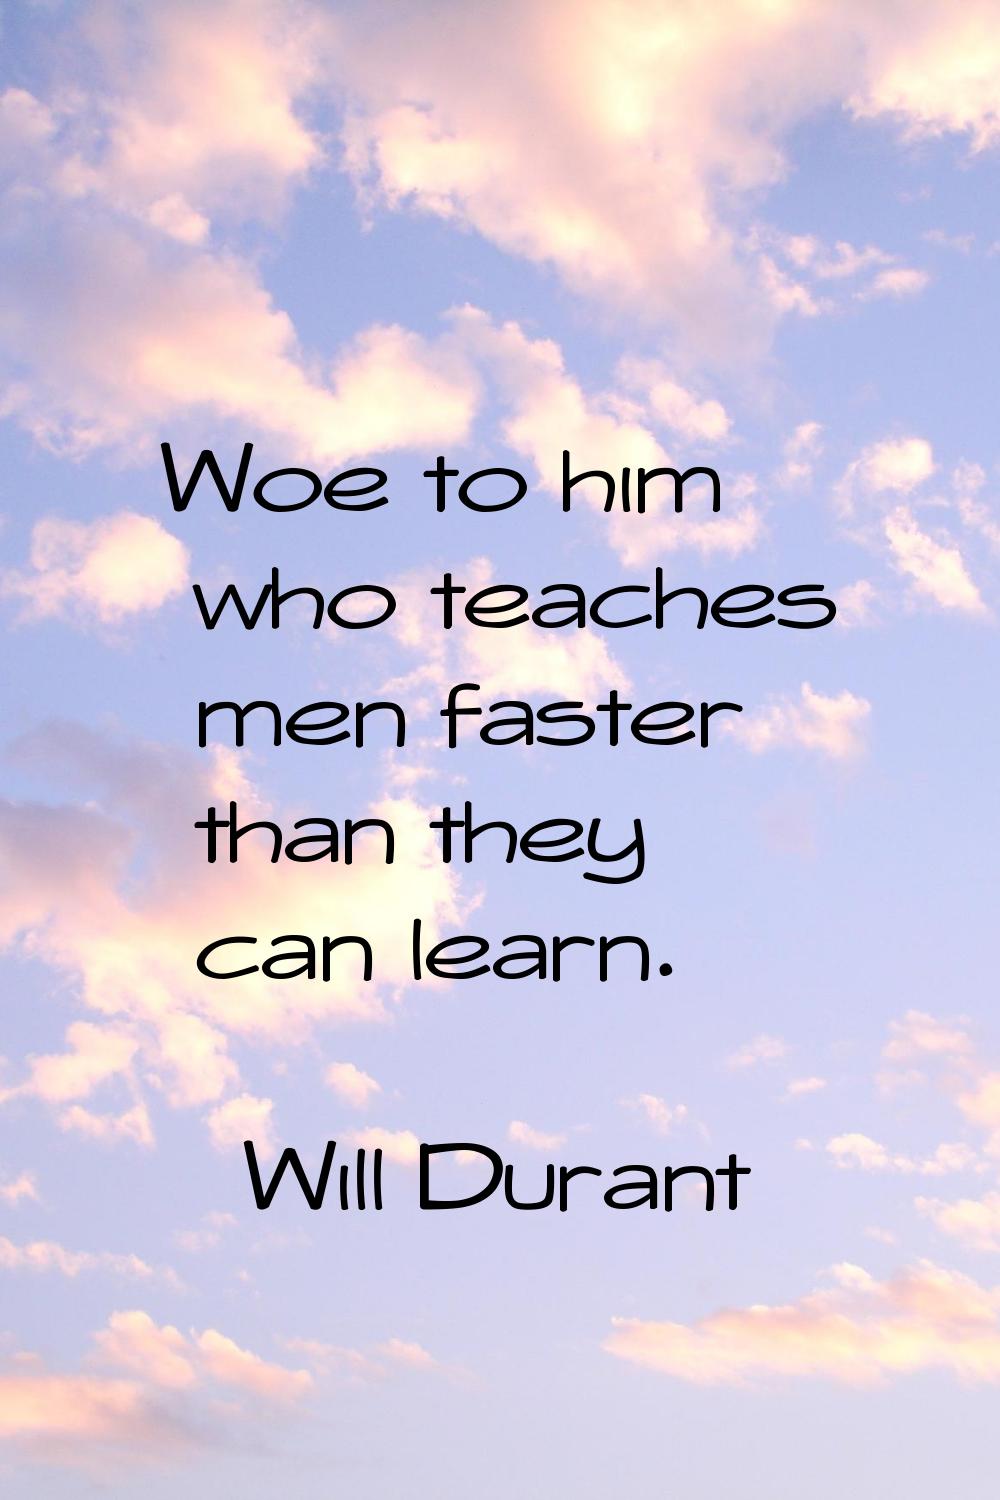 Woe to him who teaches men faster than they can learn.